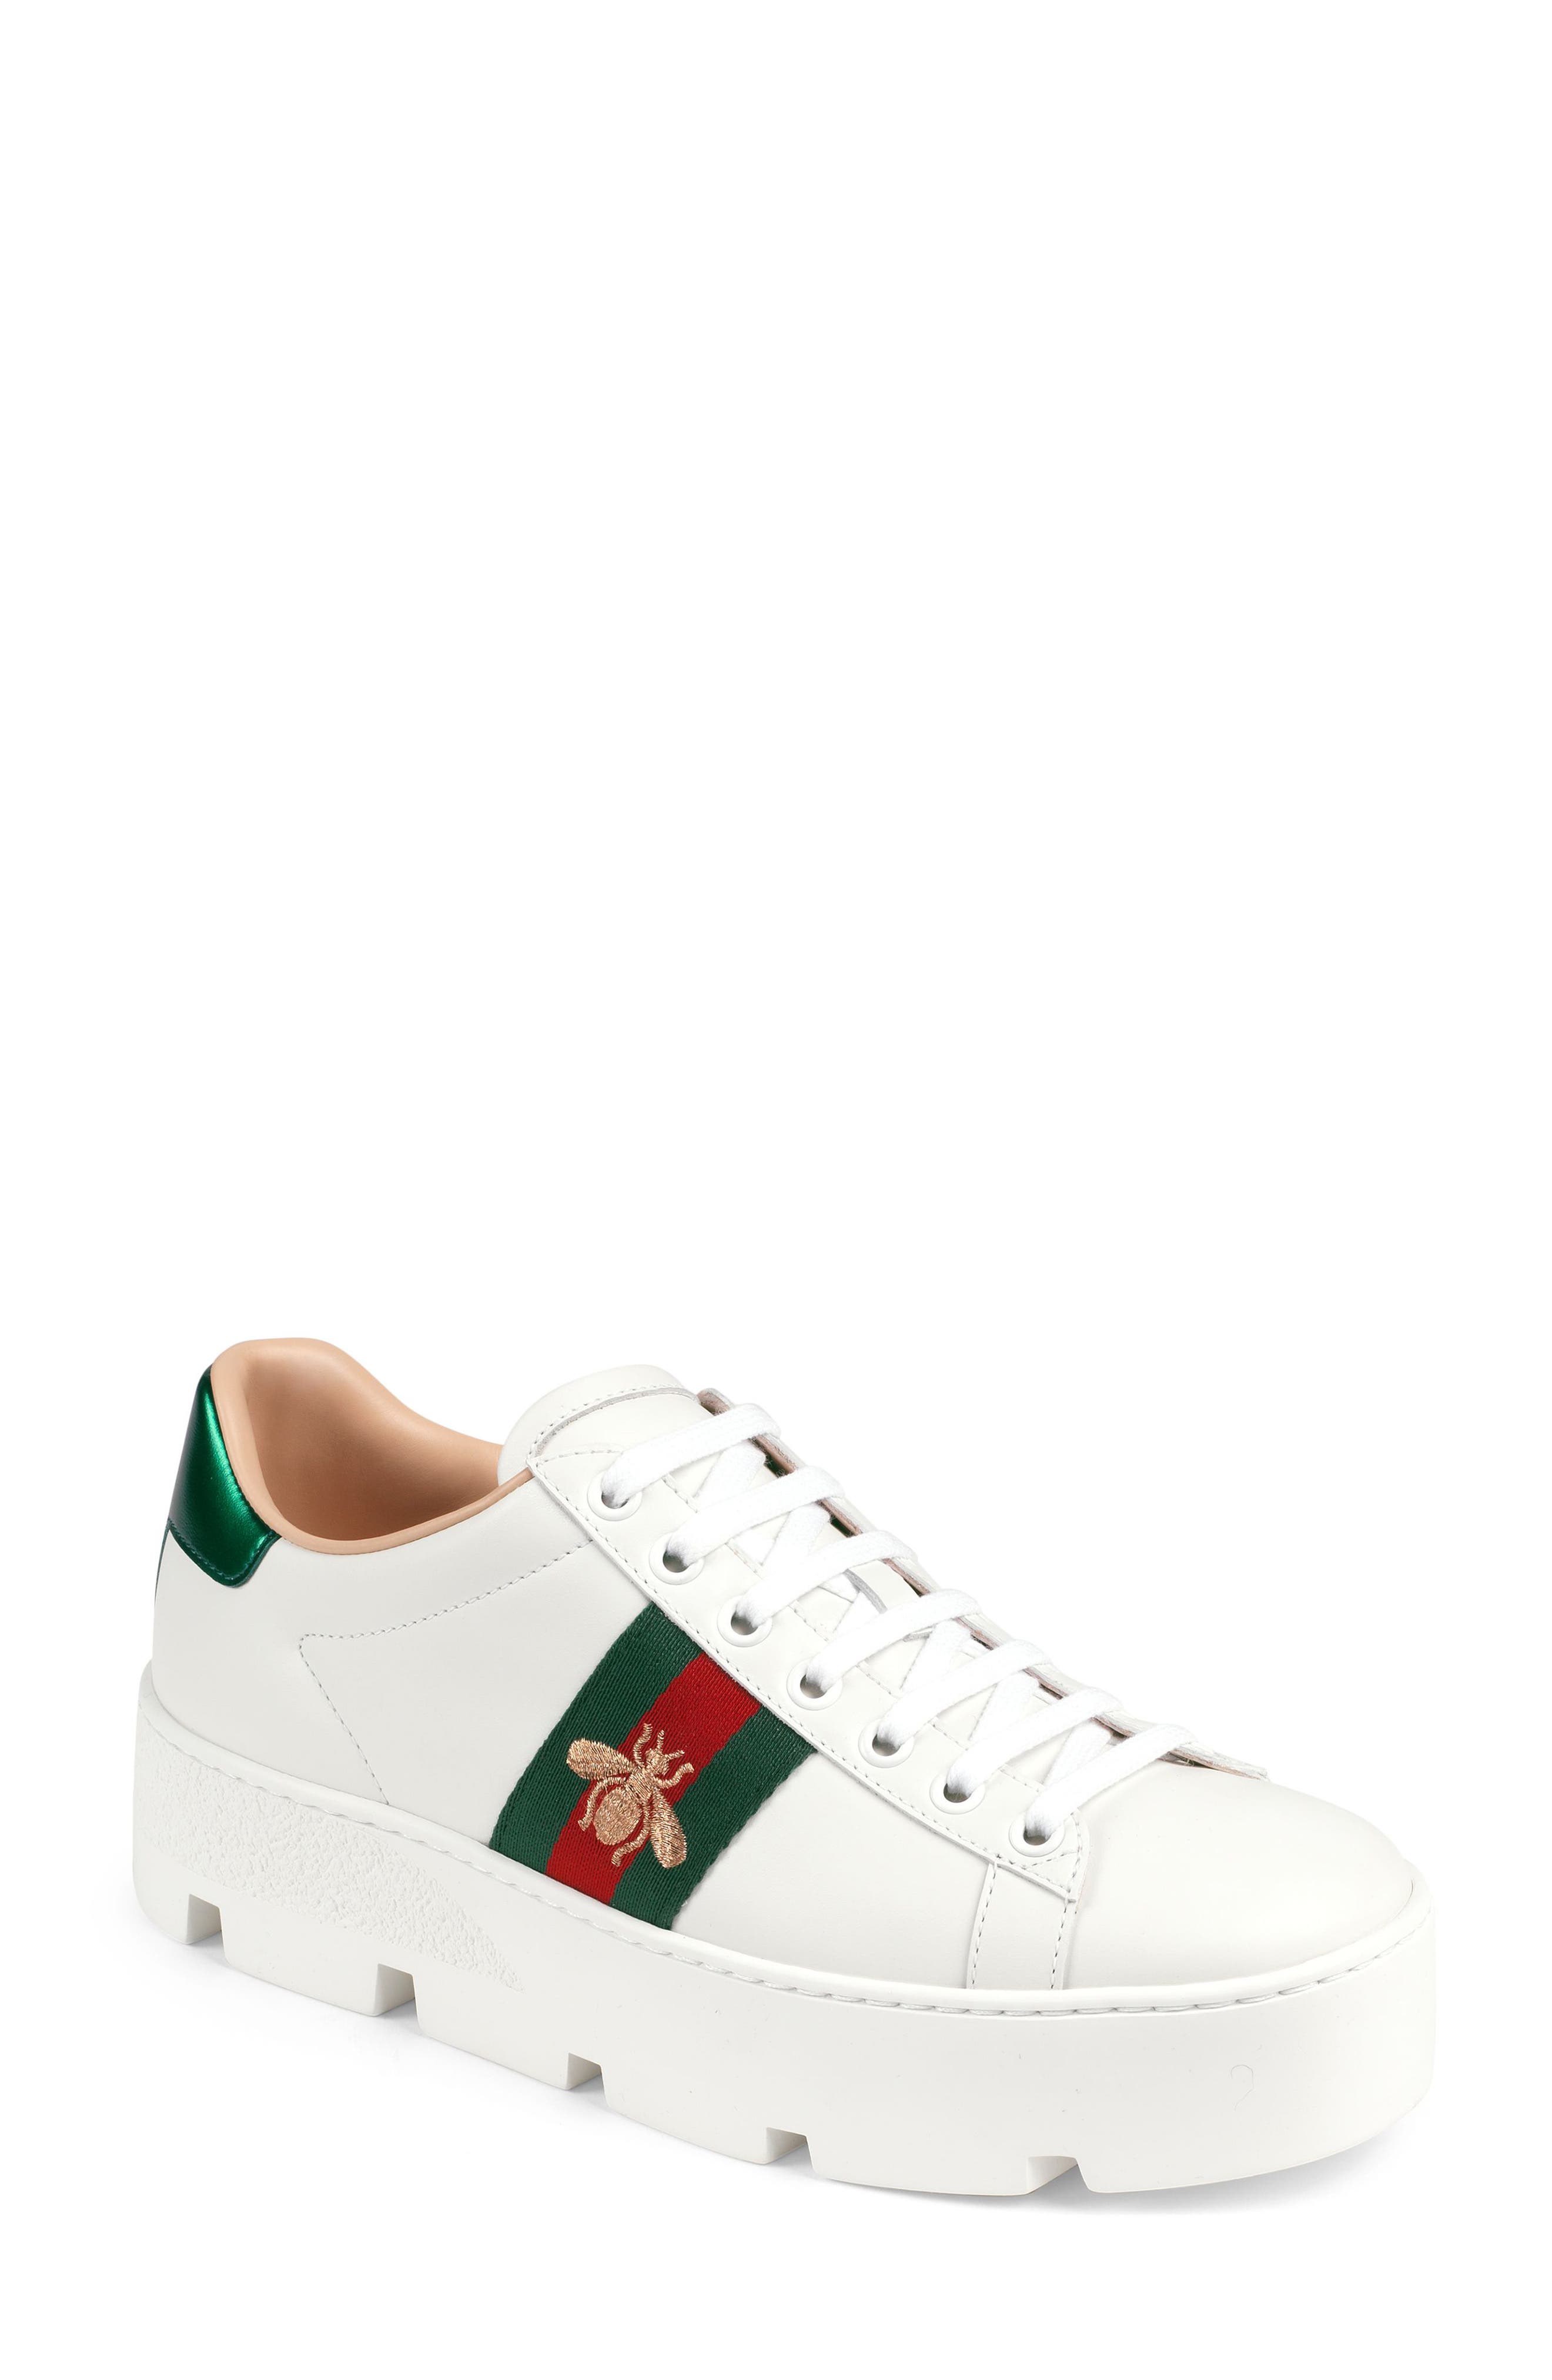 the new gucci shoes